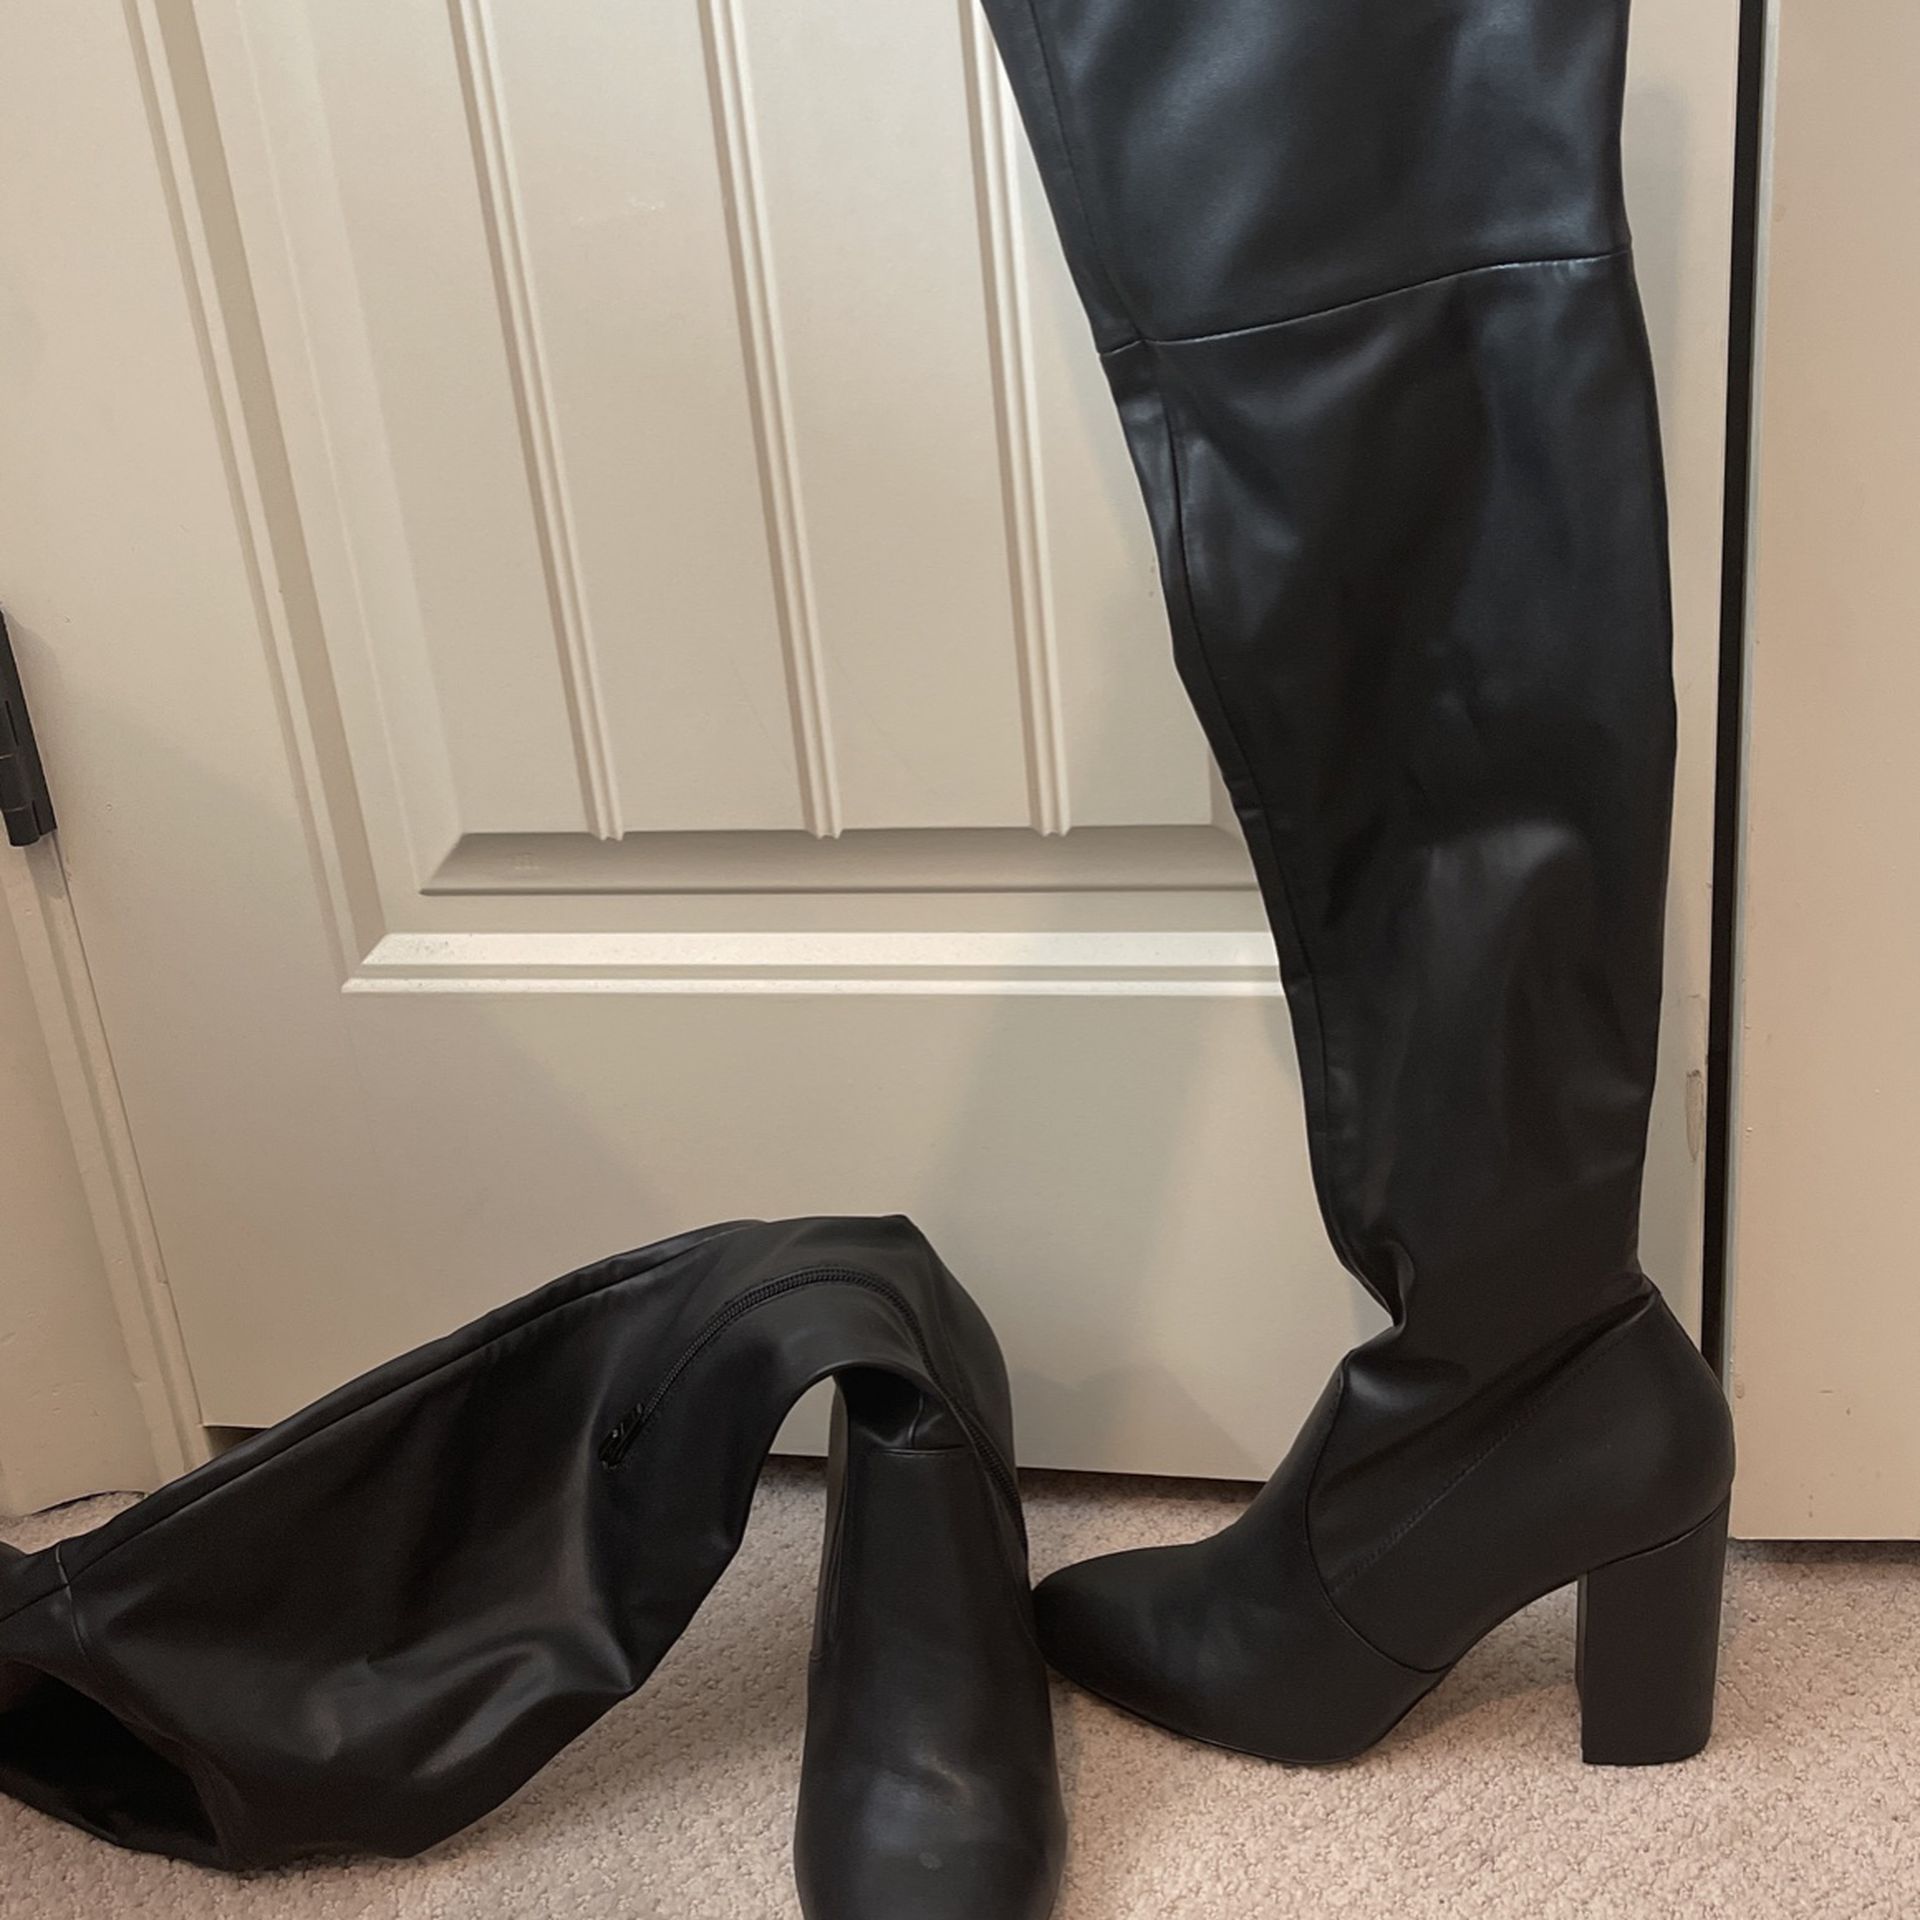 Women’s Black Leather Knee High Boots  from Aldo 